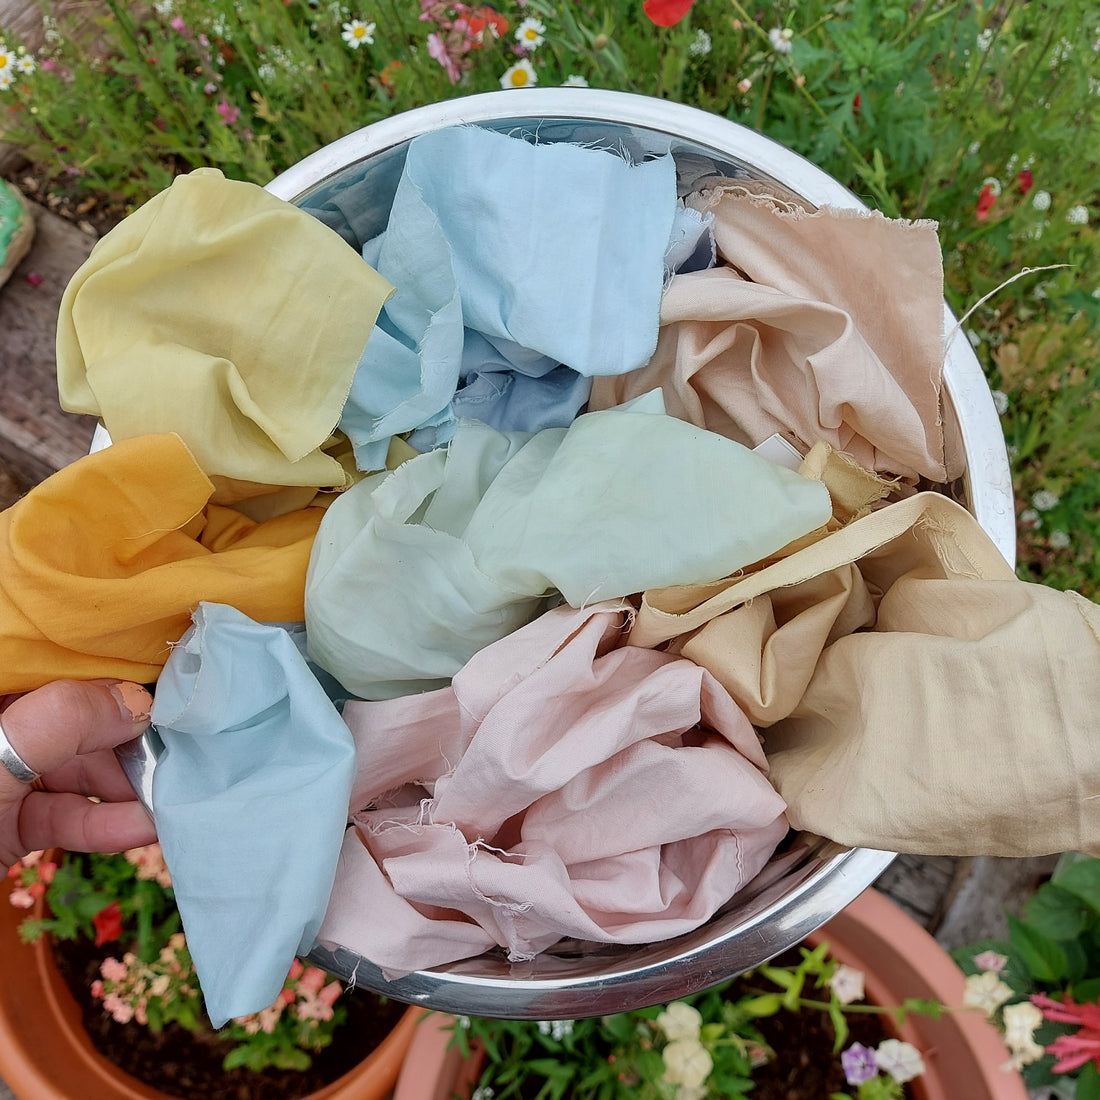 Natural dye experiments: from the kitchen